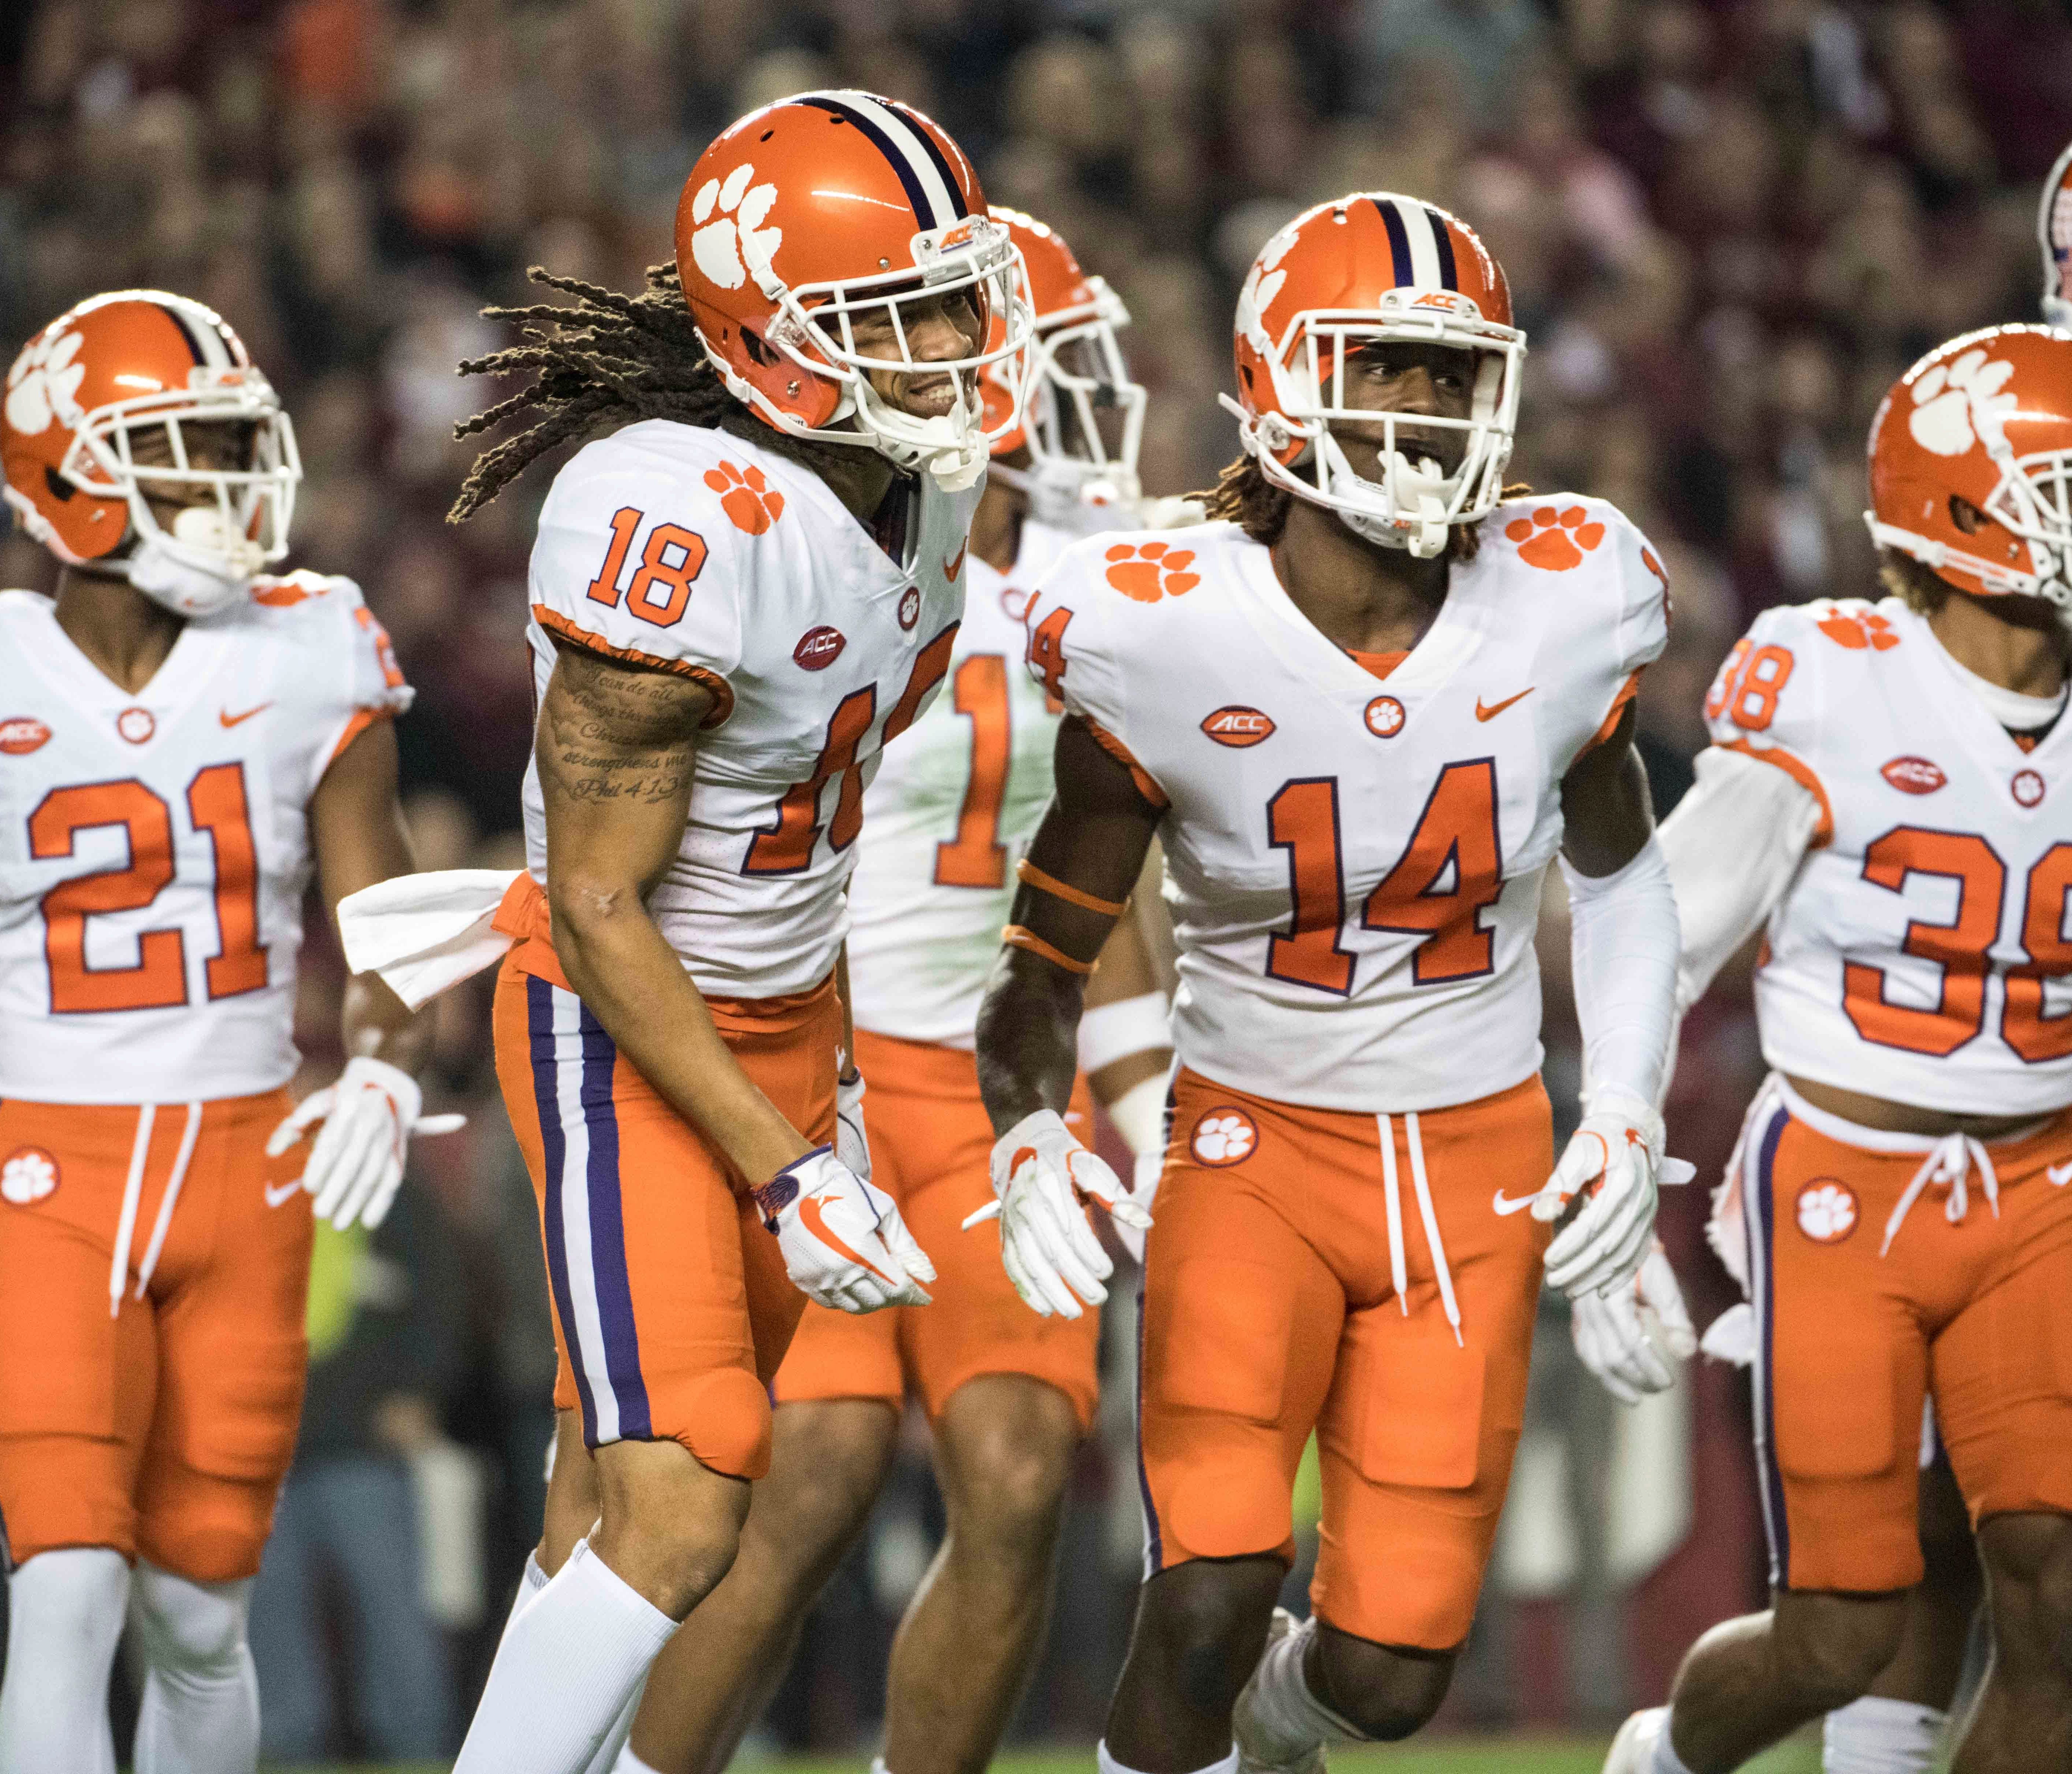 Clemson players celebrate after a play against South Carolina.